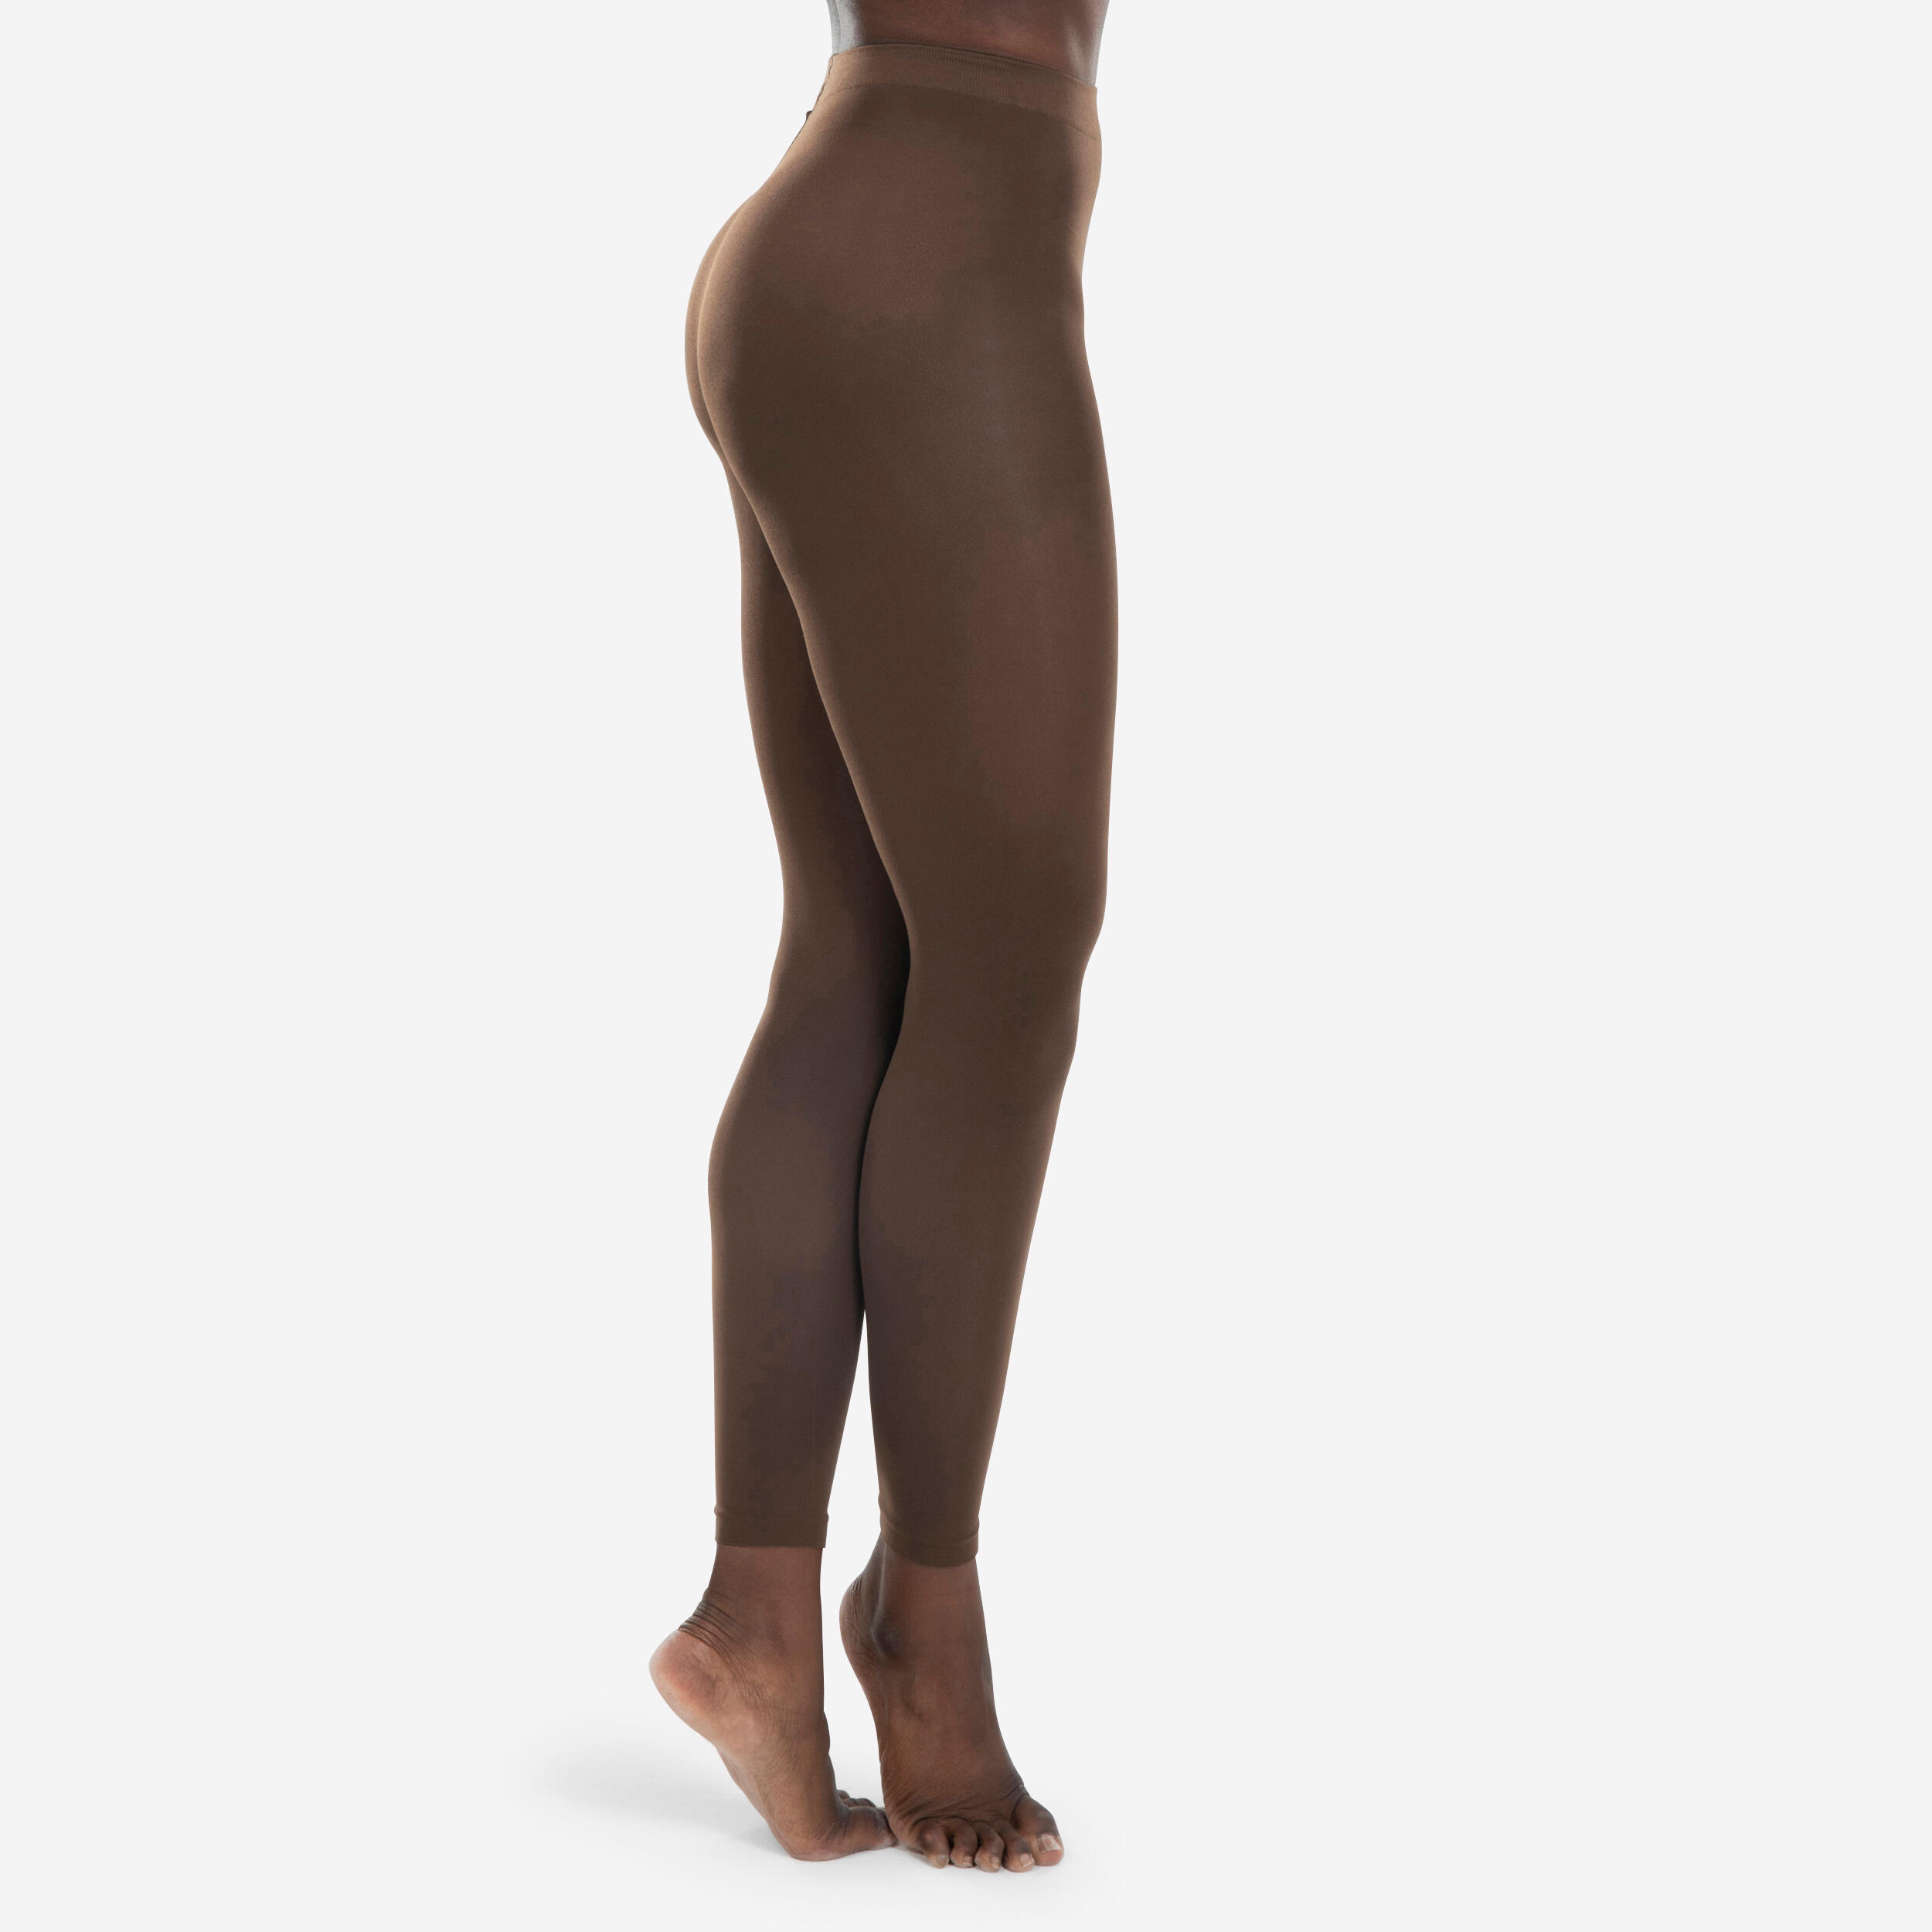 STAREVER Women's Footless Ballet Tights - Chocolate